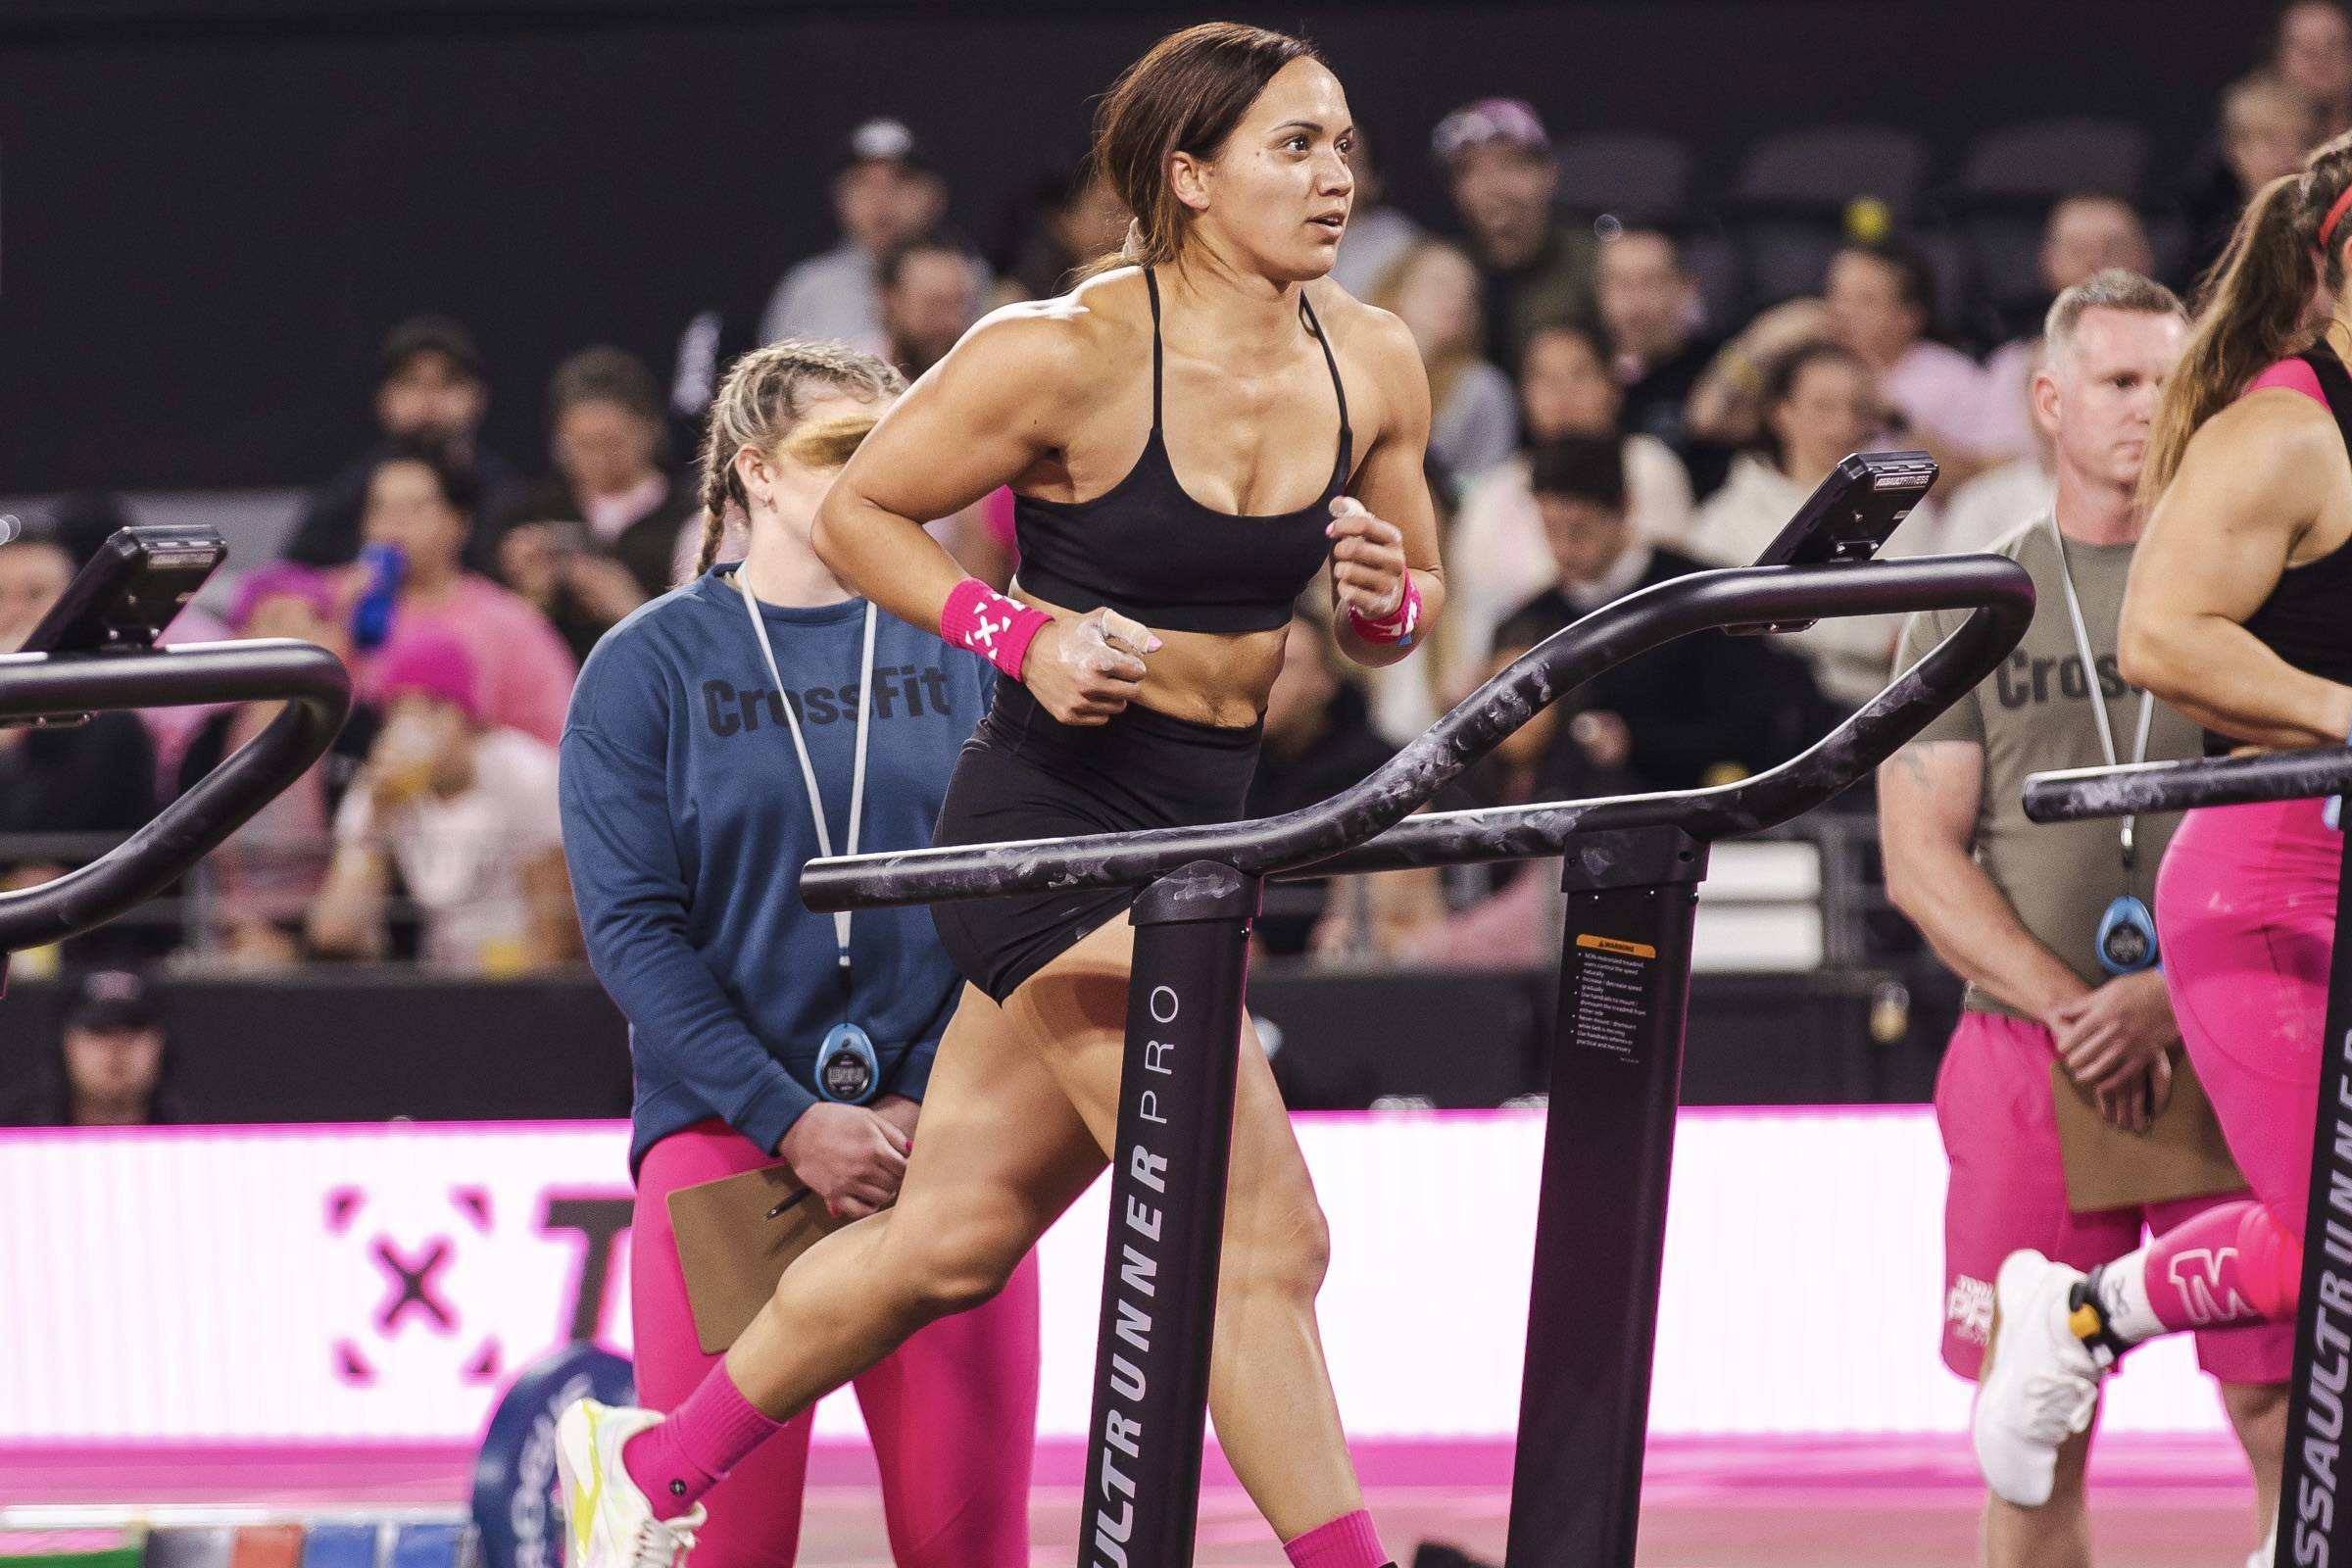 girl running on a tredmill during a crossfit workout